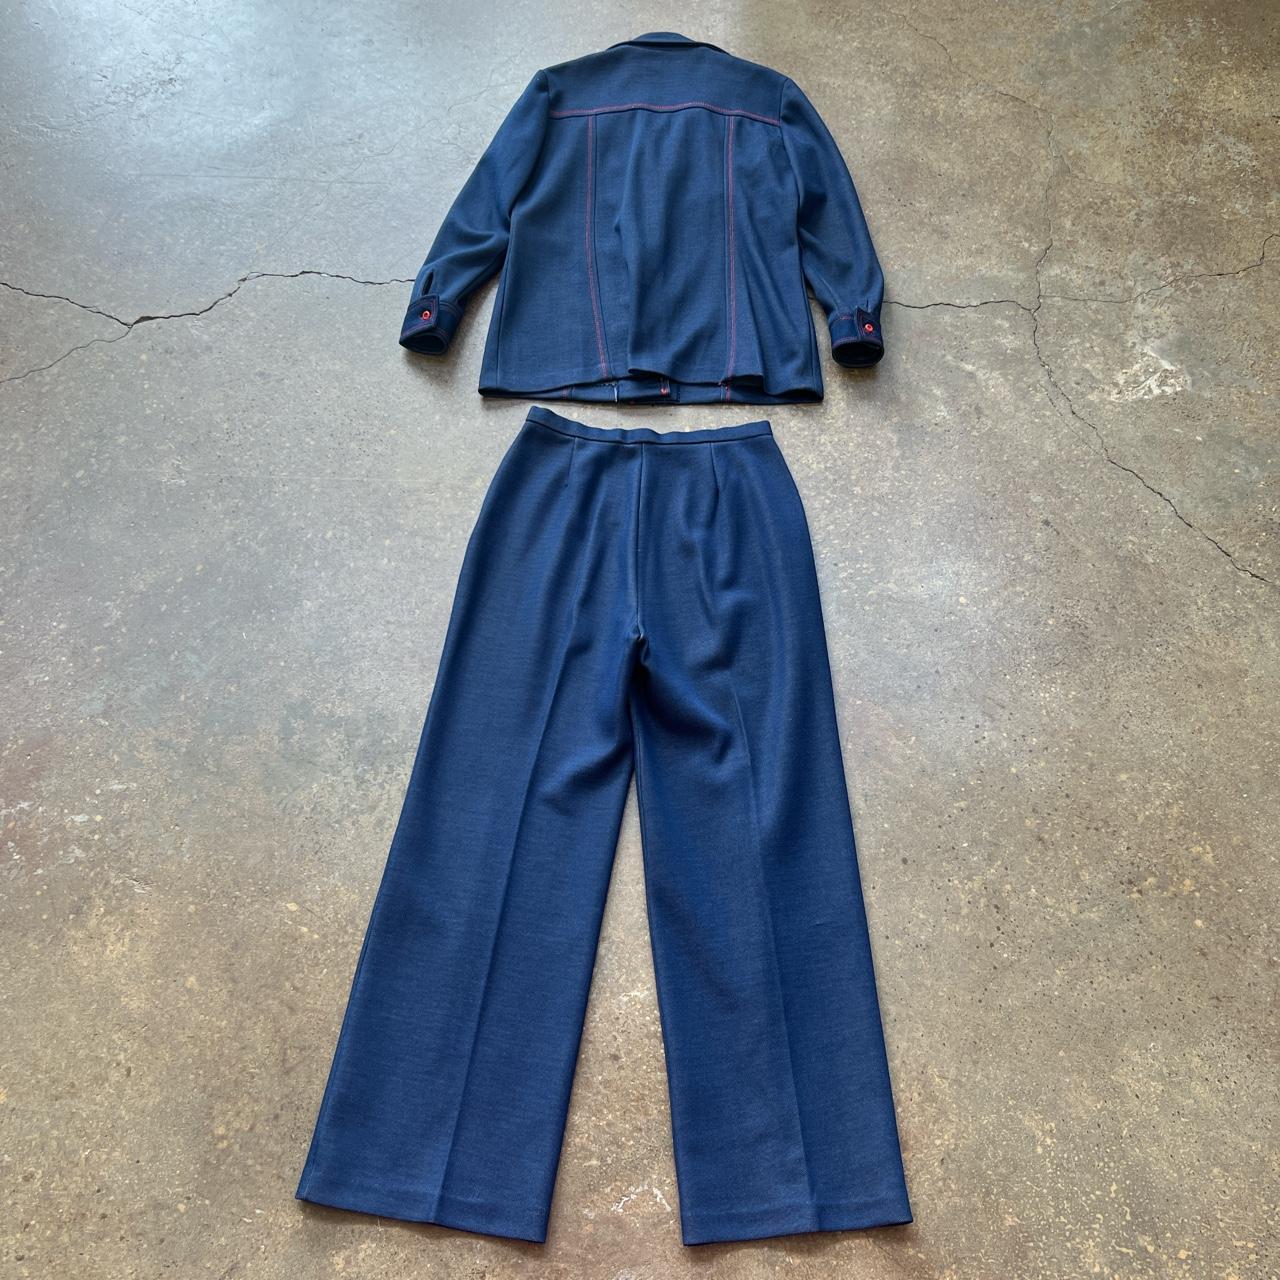 American Vintage Women's Navy and Blue Suit (4)